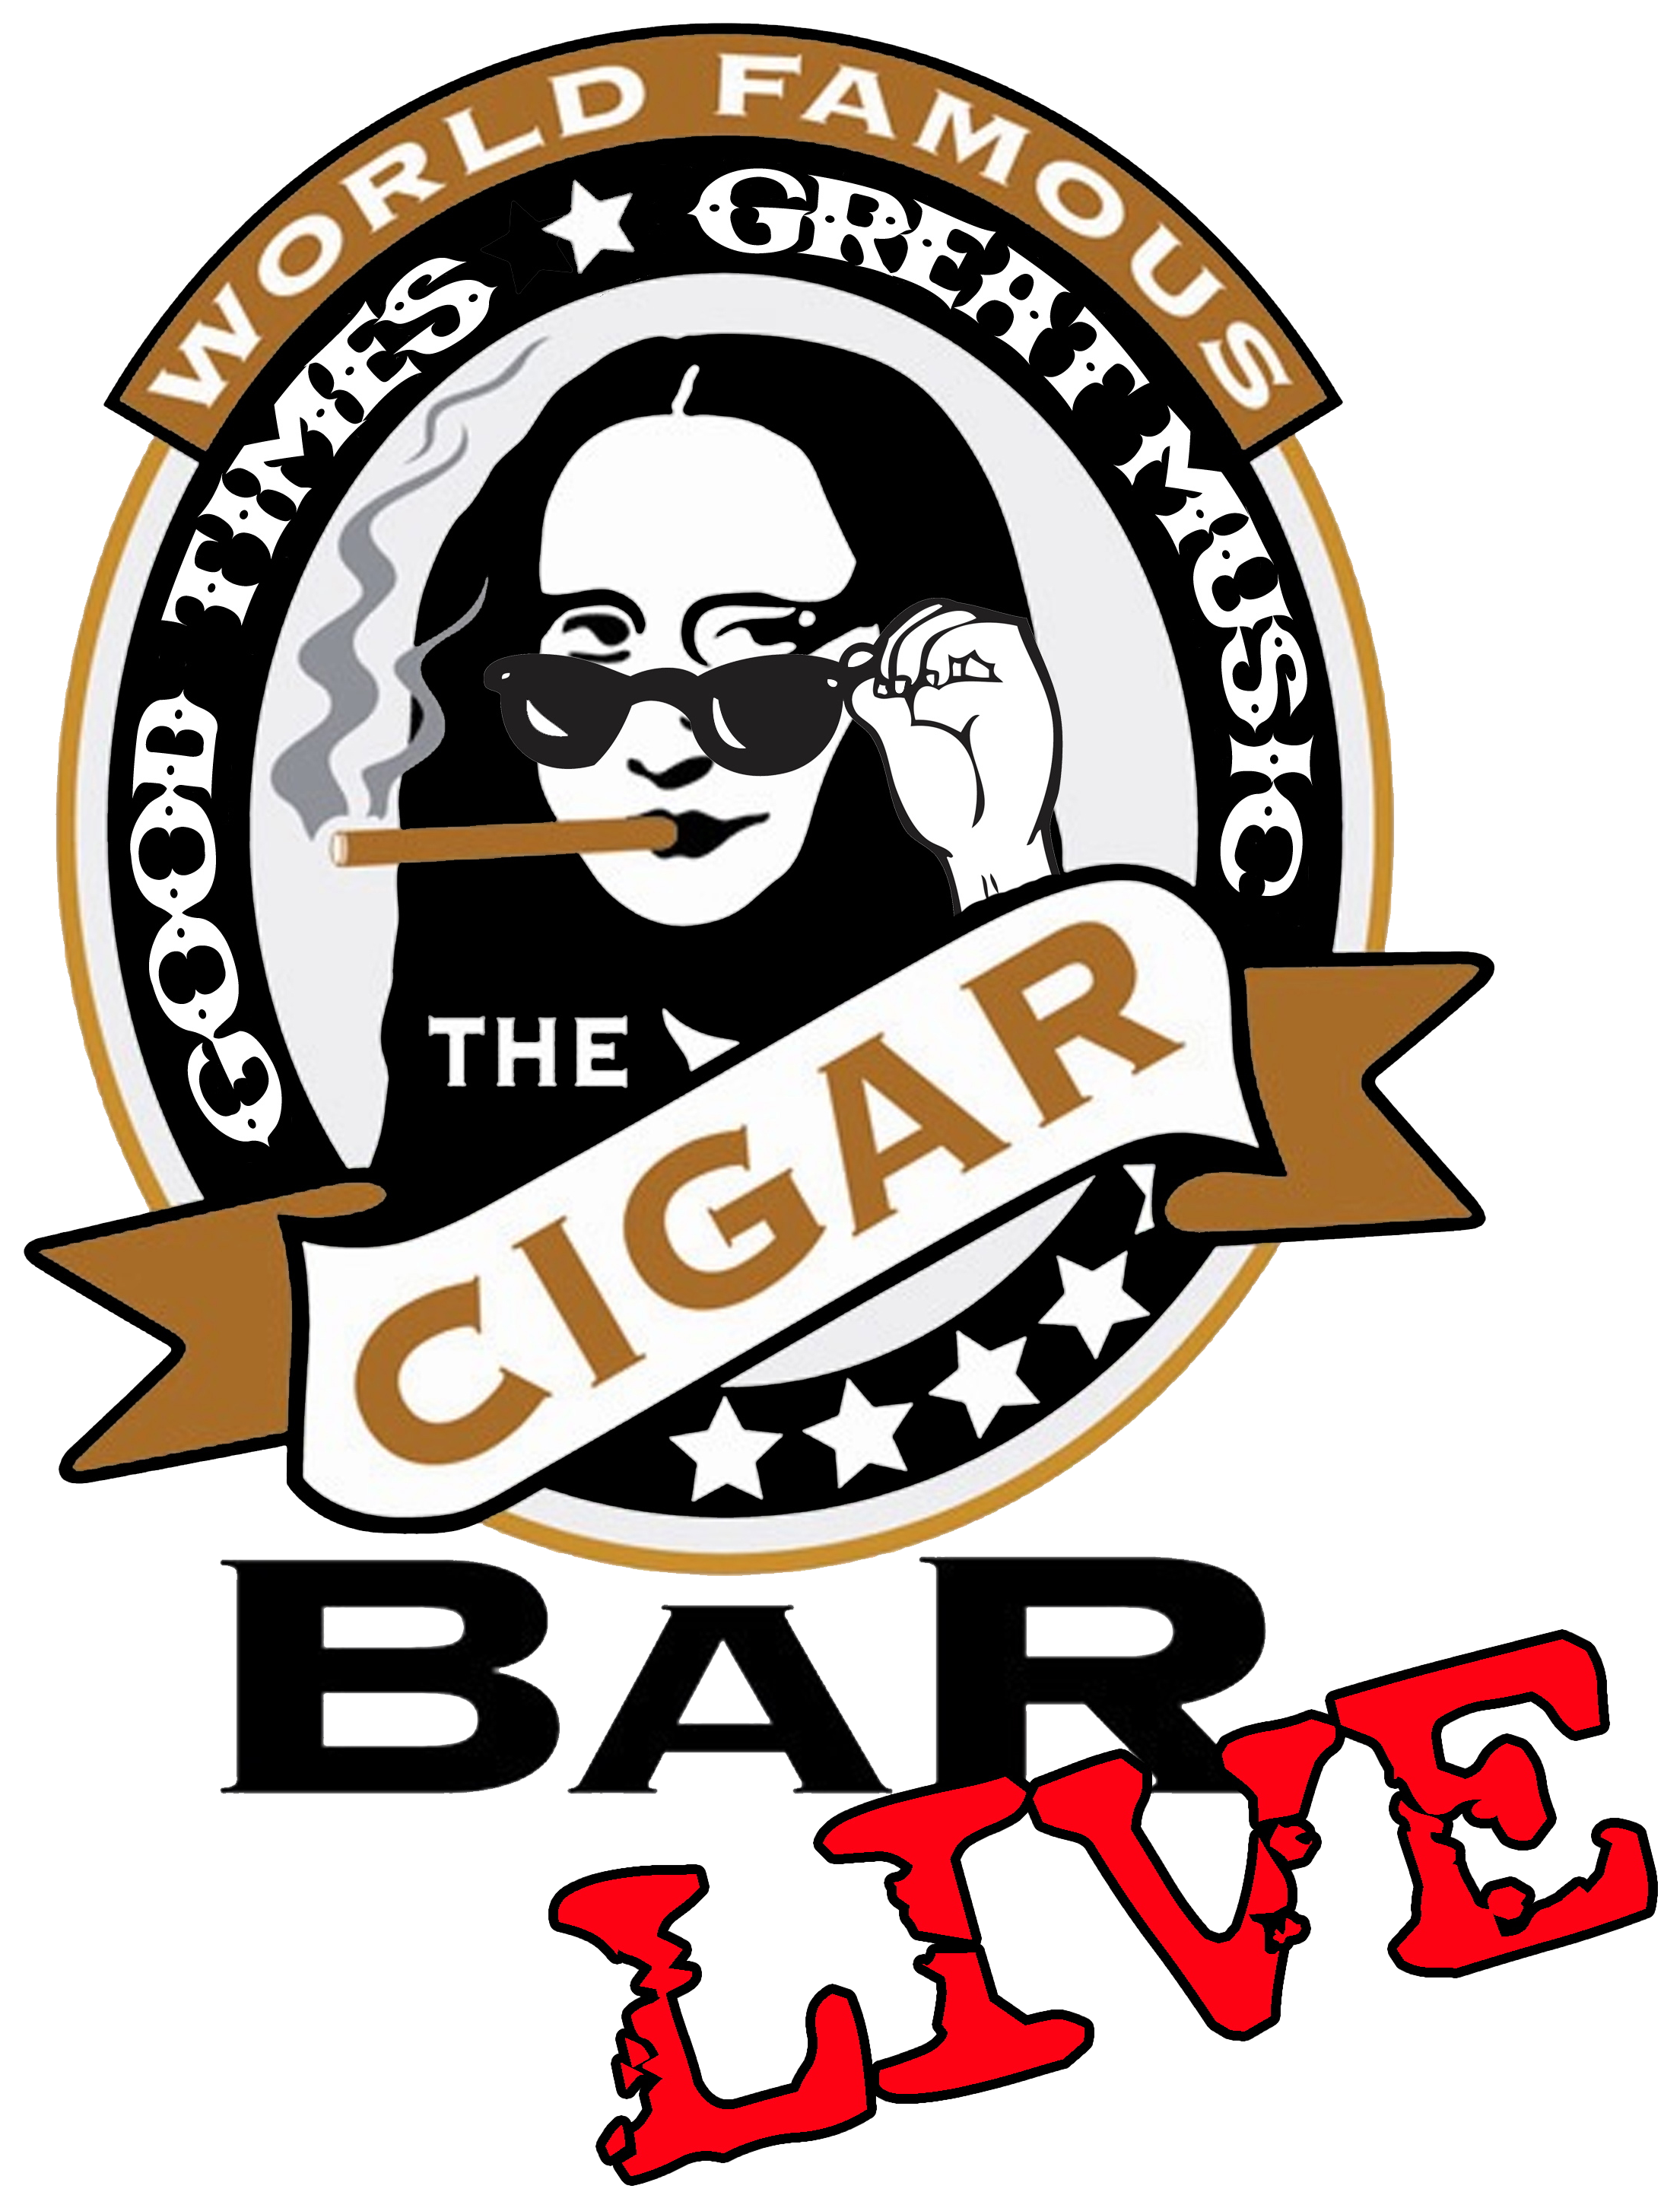 Png - Http - //www - Worldfamouscigarbar - Com/wp Cigar - Png - Http - //www - Worldfamouscigarbar - Com/wp Cigar (2550x3166)